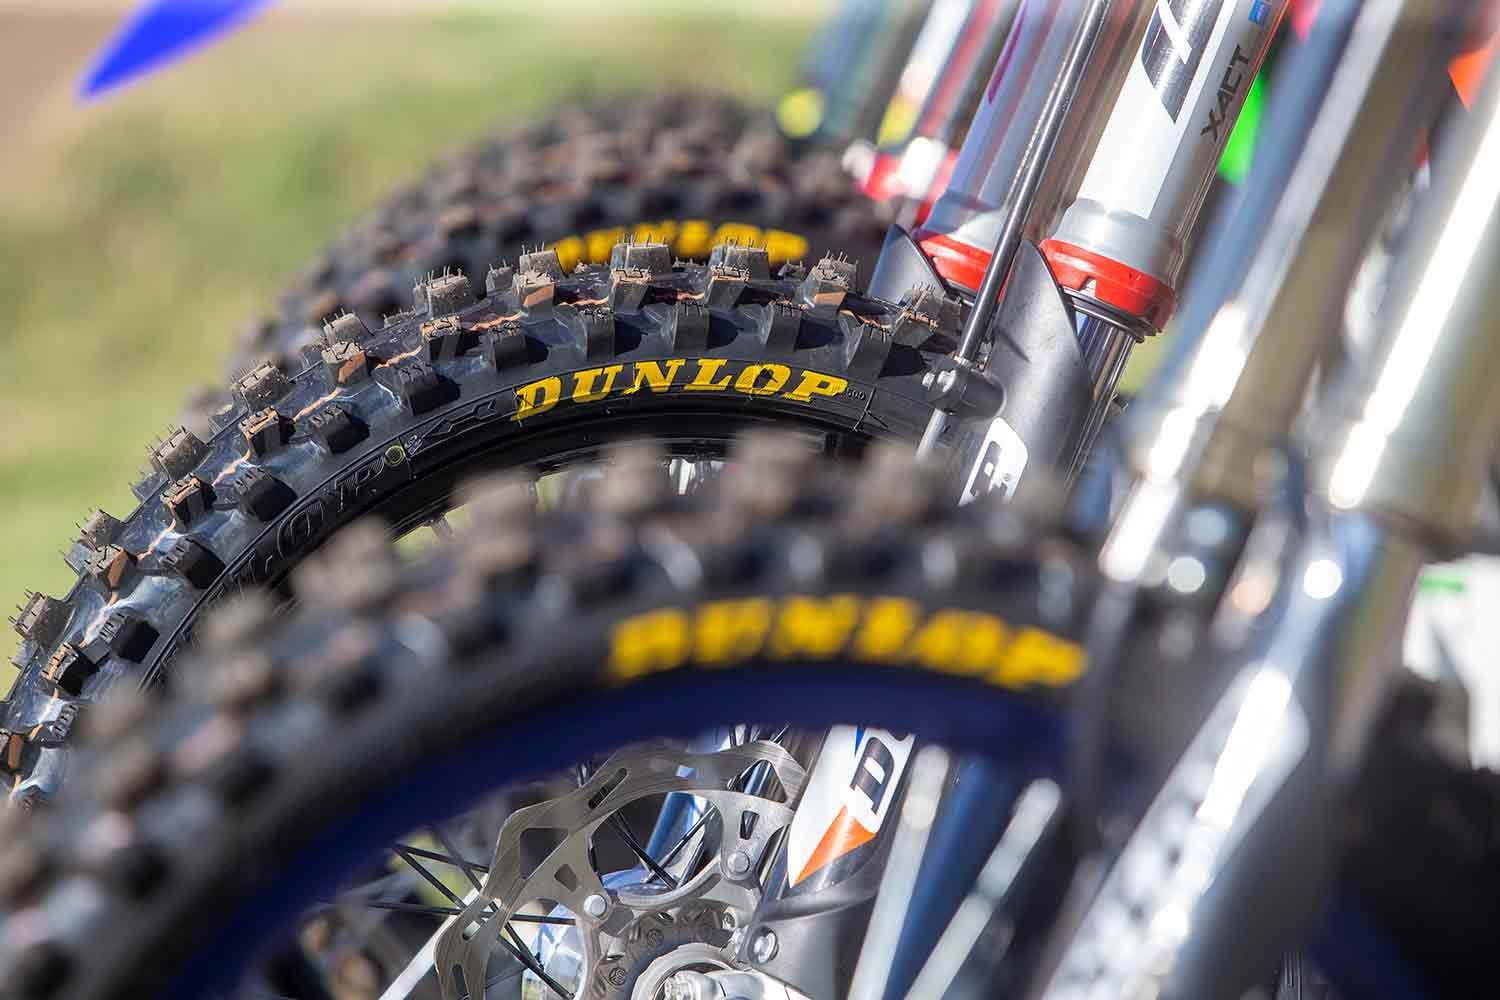 Dunlop Geomax MX33 soft-to-intermediate-terrain tires ensured consistency in traction among the five bikes through the duration of the 450 Motocross Shootout.